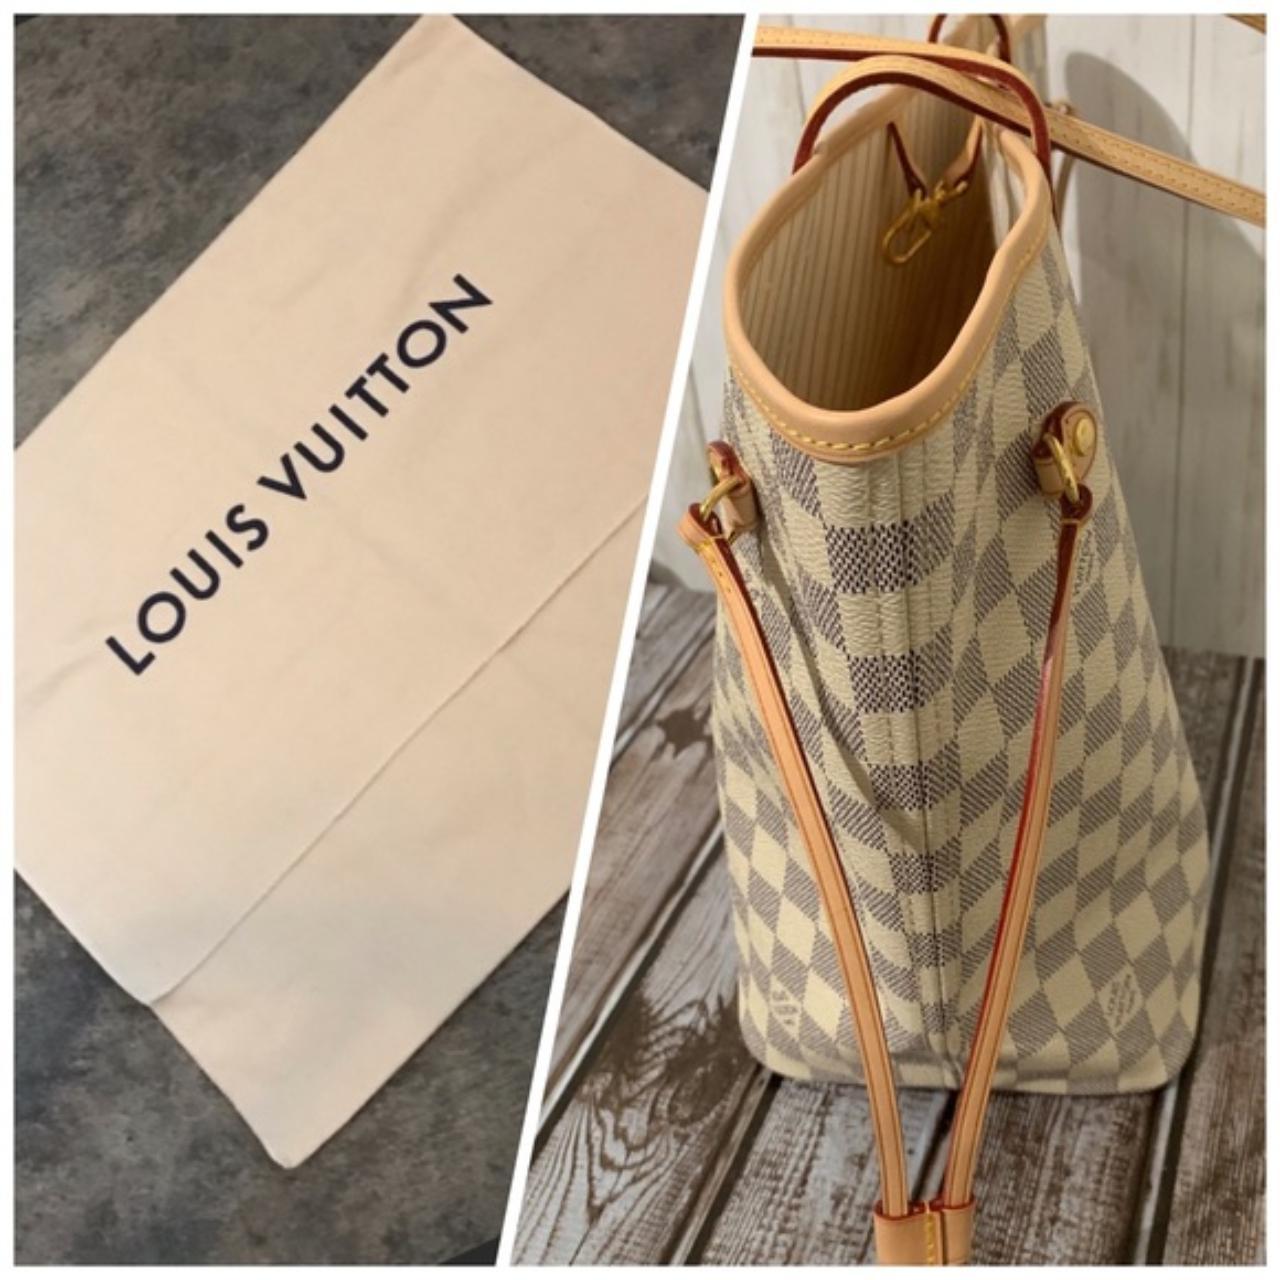 Louise vuitton neverfull MM. Receipt comes with it - Depop